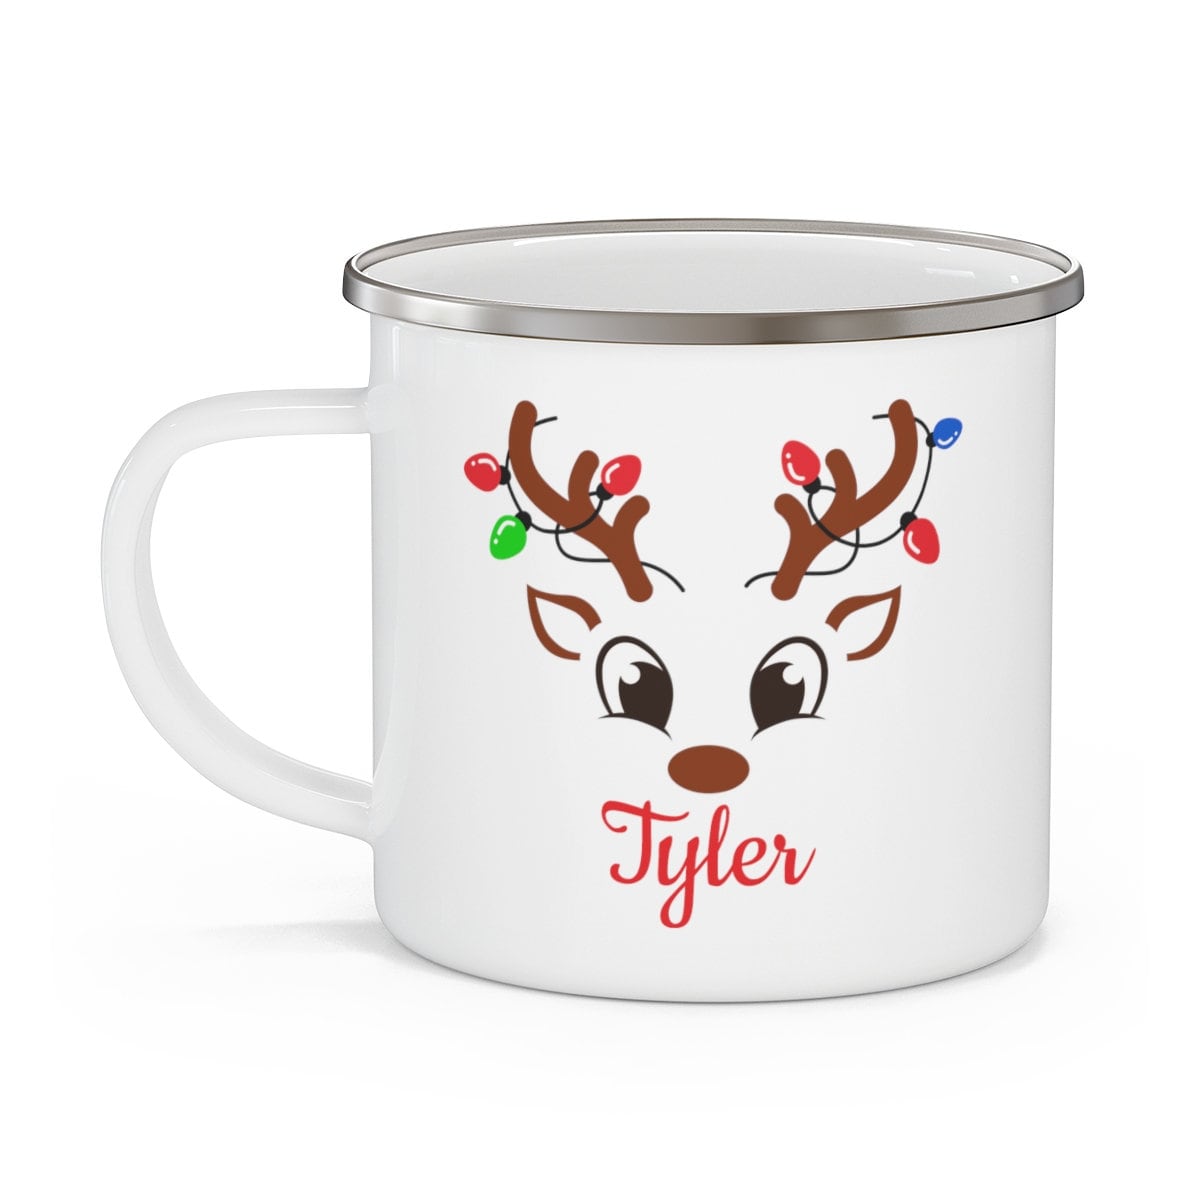 Festive Drink Toppers and Winter Mugs for Hot Chocolate and Holiday  Beverages (Gift Ideas) - The Inspired Room